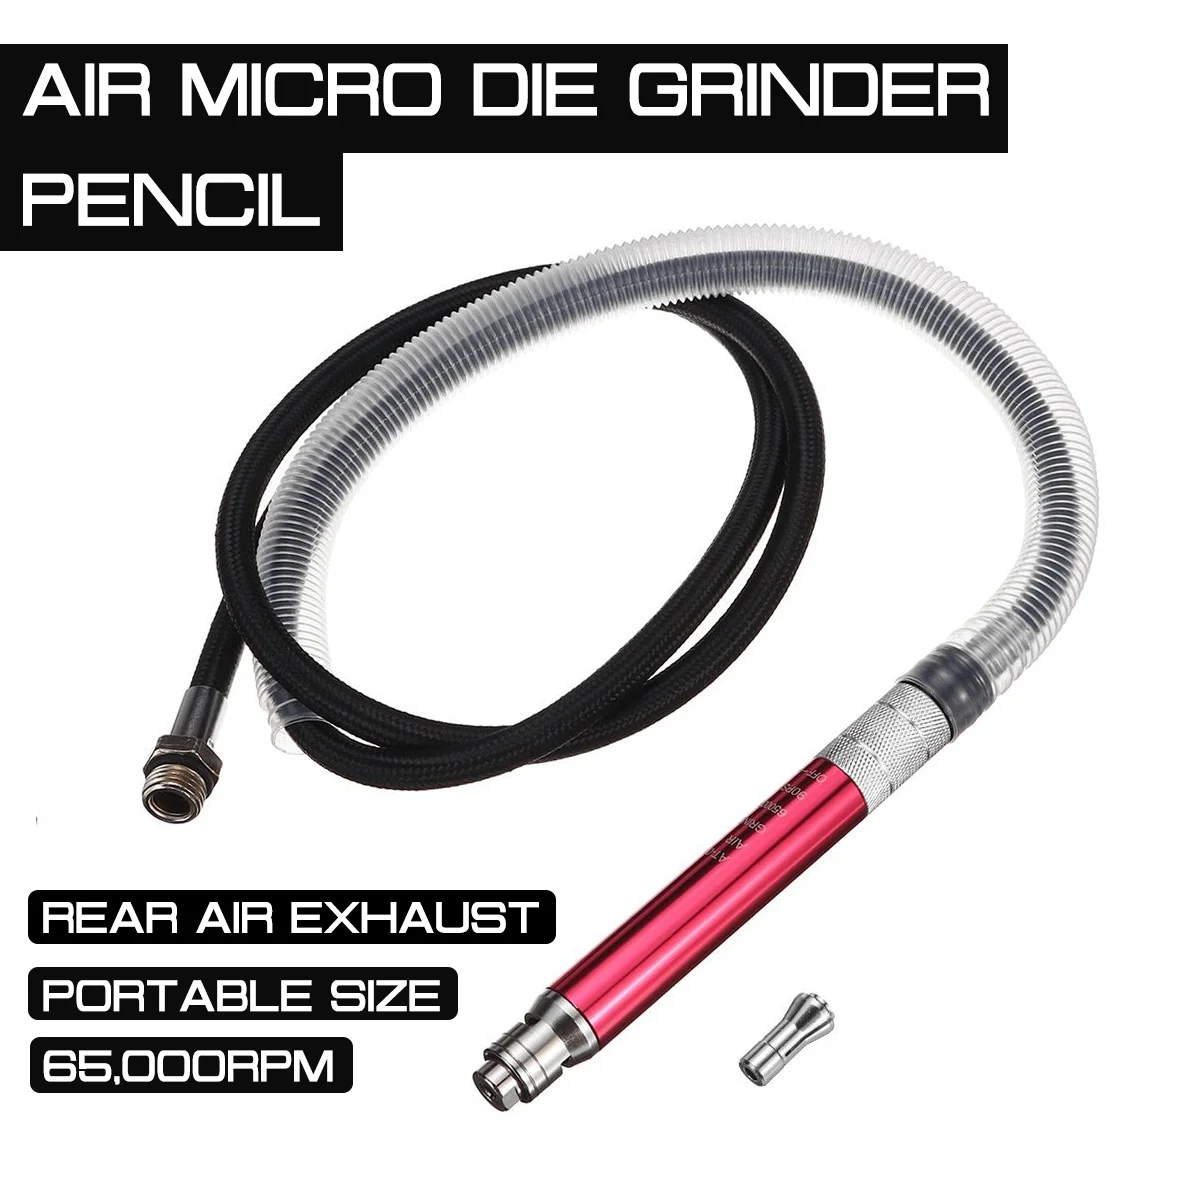 

Grinder Air Micro Die Pencil 65,000 RPM Professional High Speed Cutting Wood Jewelry Polishing Grinding Engraving Pneumatic Tool